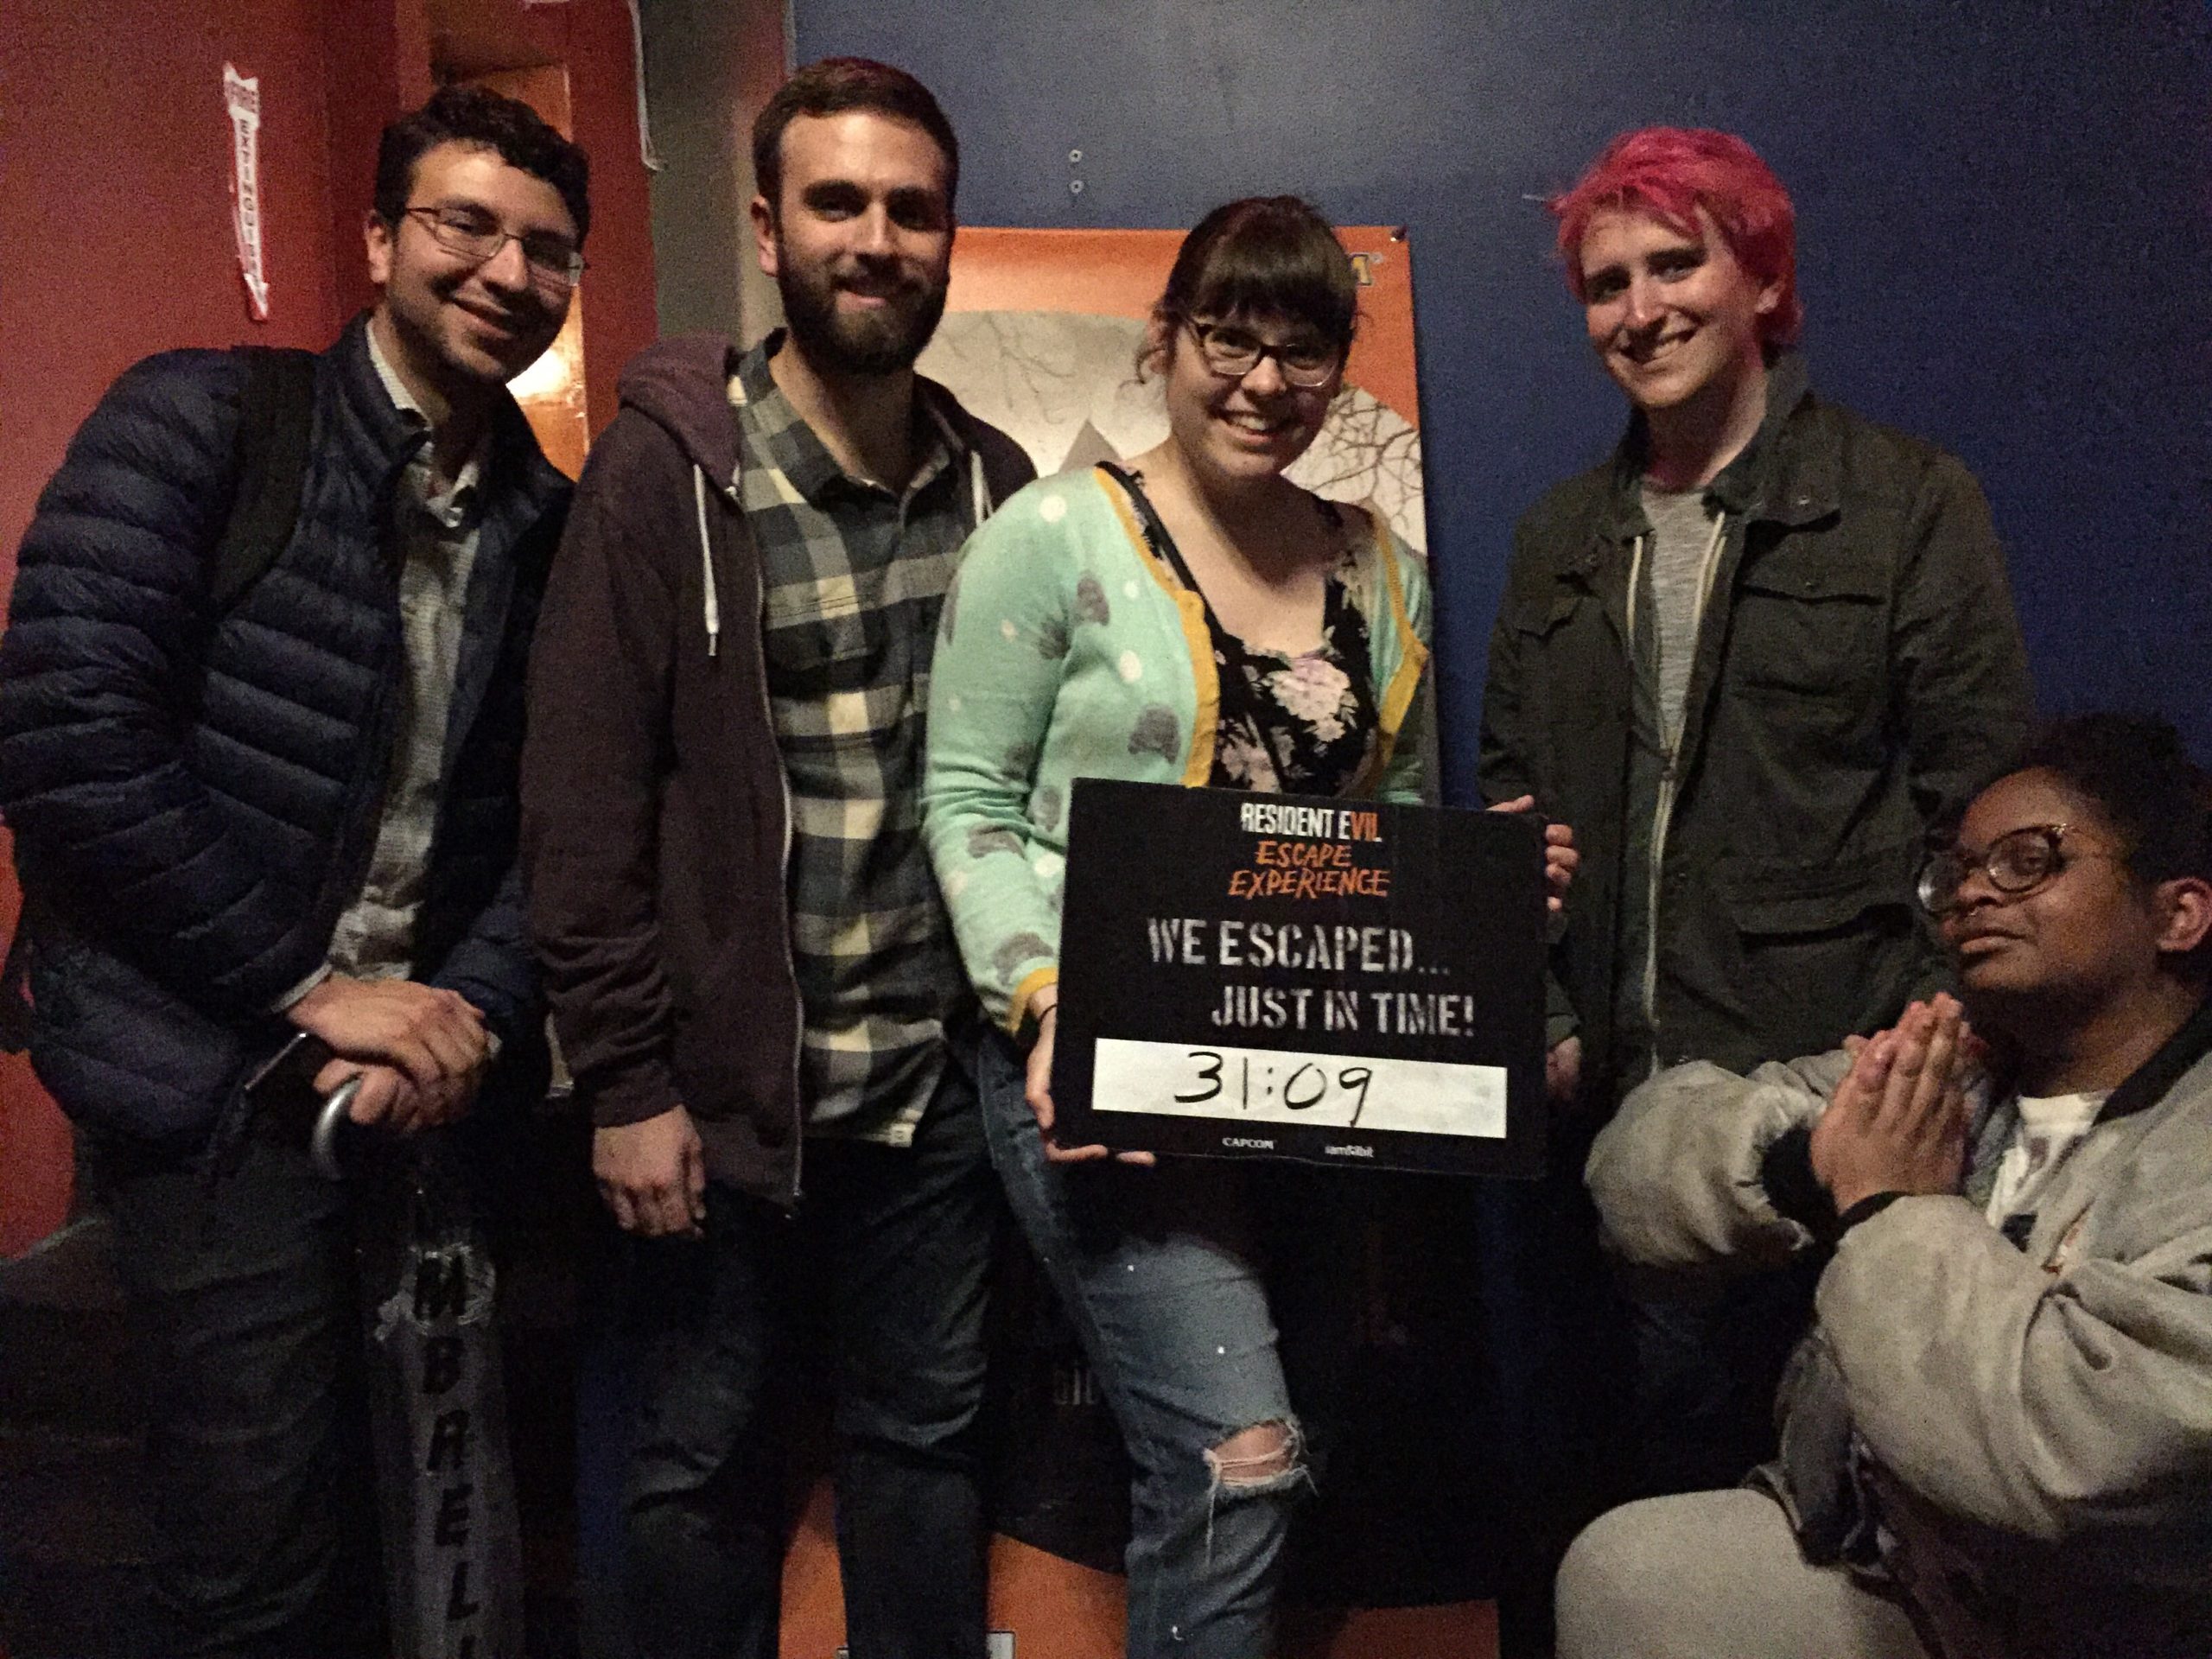 We Did A Resident Evil Escape Room And It Was Awesome